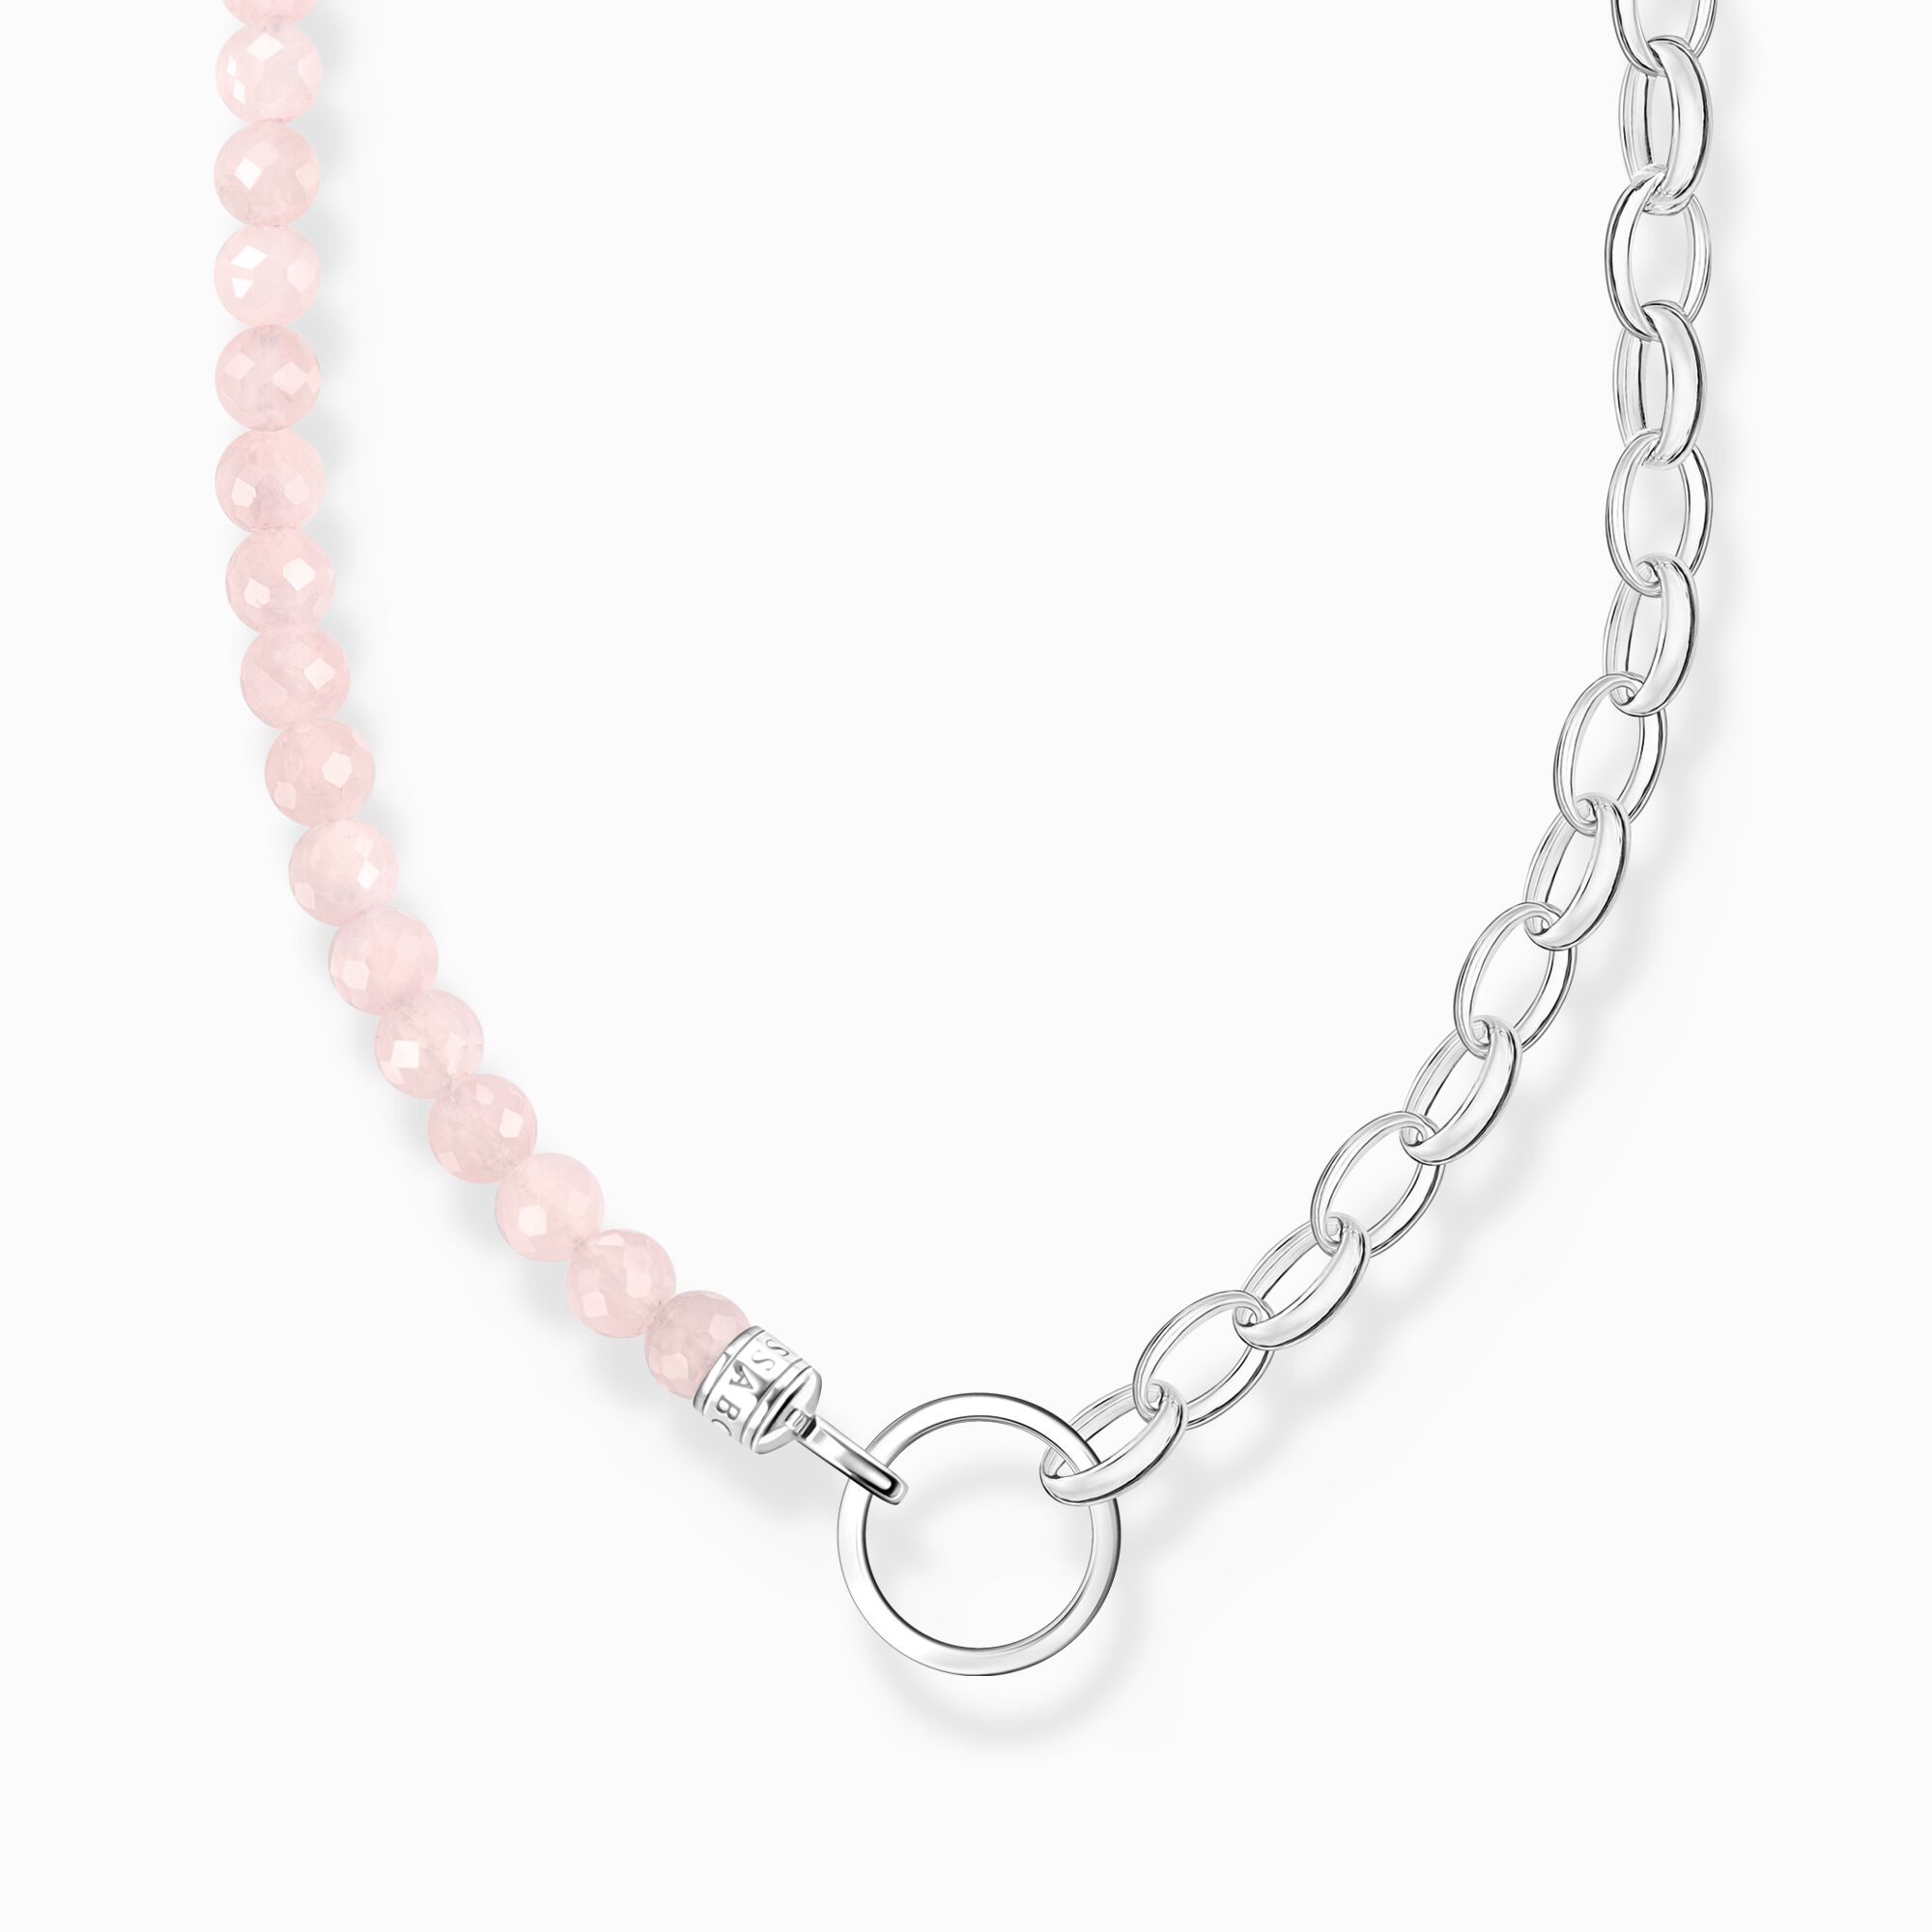 Charm necklace with beads of rose quartz silver from the Charm Club collection in the THOMAS SABO online store